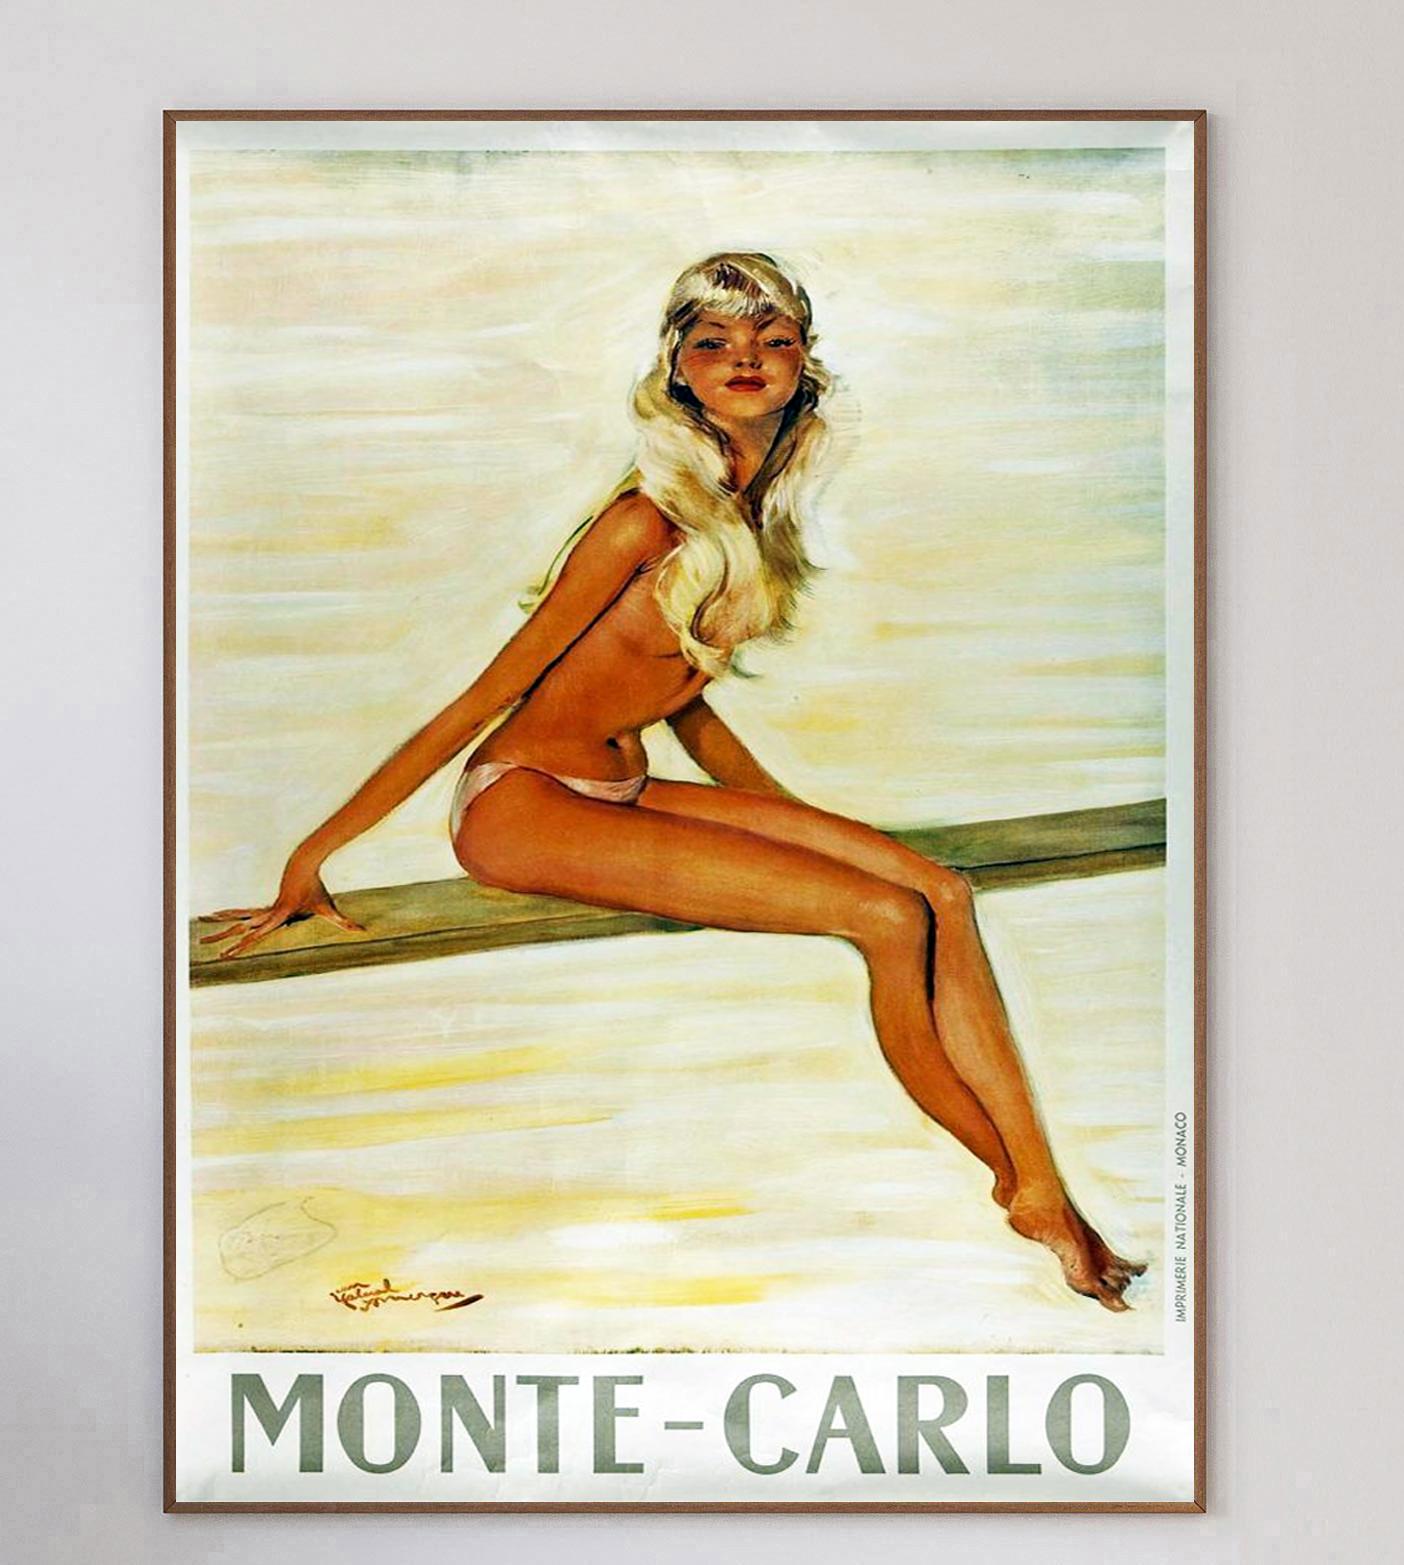 Absolutely stunning poster promoting the area of Monte-Carlo in Monaco from 1950. This mid-century piece has timeless class with artwork from French artist, widely regarded as the father of the pin-up, Jean Gabiel Domergue.

Many have mystified